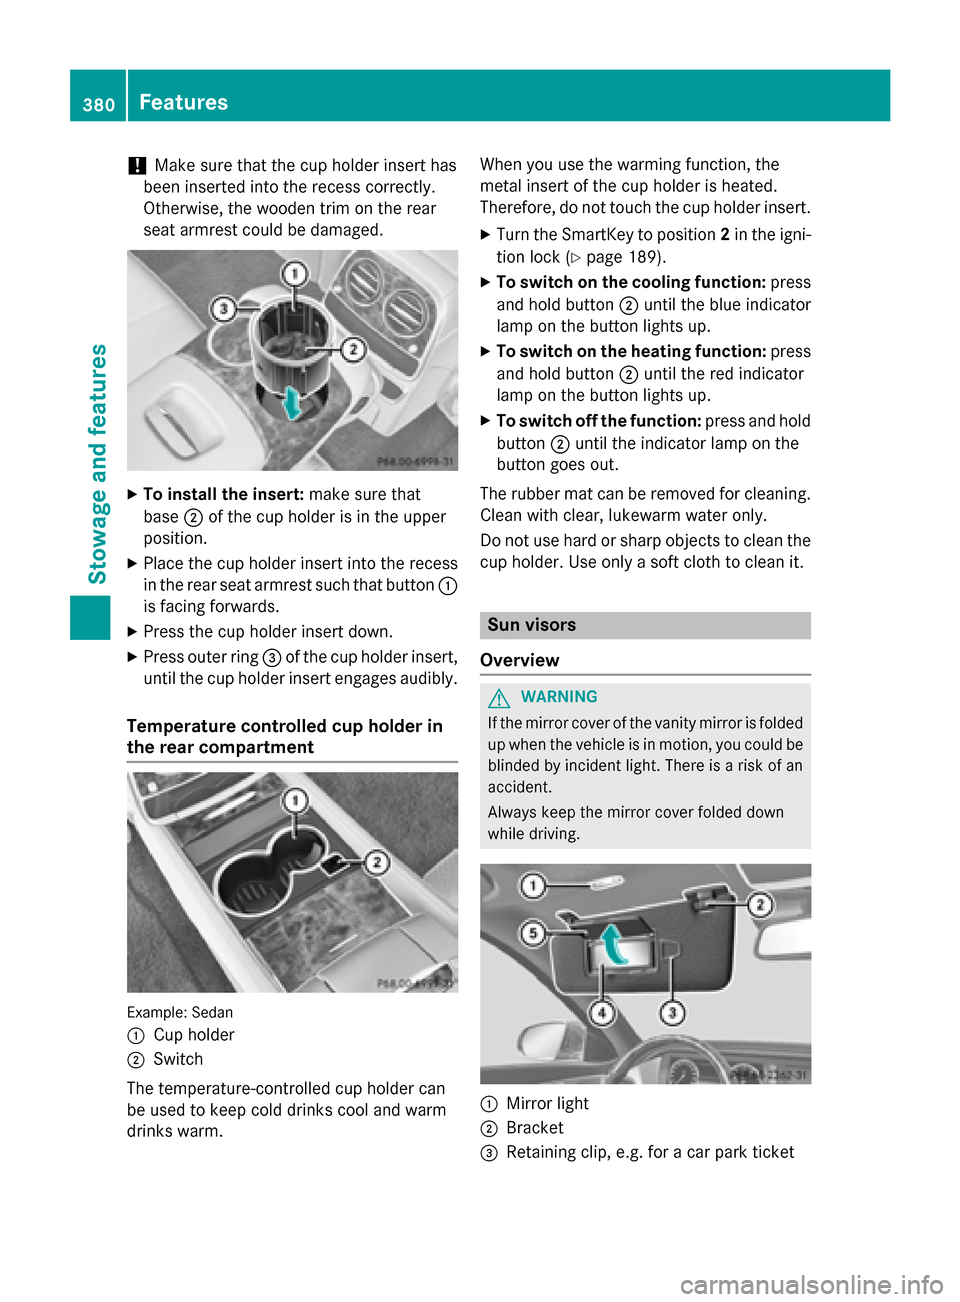 MERCEDES-BENZ S-Class 2015 W222 User Guide !
Make sure that the cup holder insert has
been inserted into the recess correctly.
Otherwise, the wooden trim on the rear
seat armrest could be damaged. X
To install the insert: make sure that
base ;